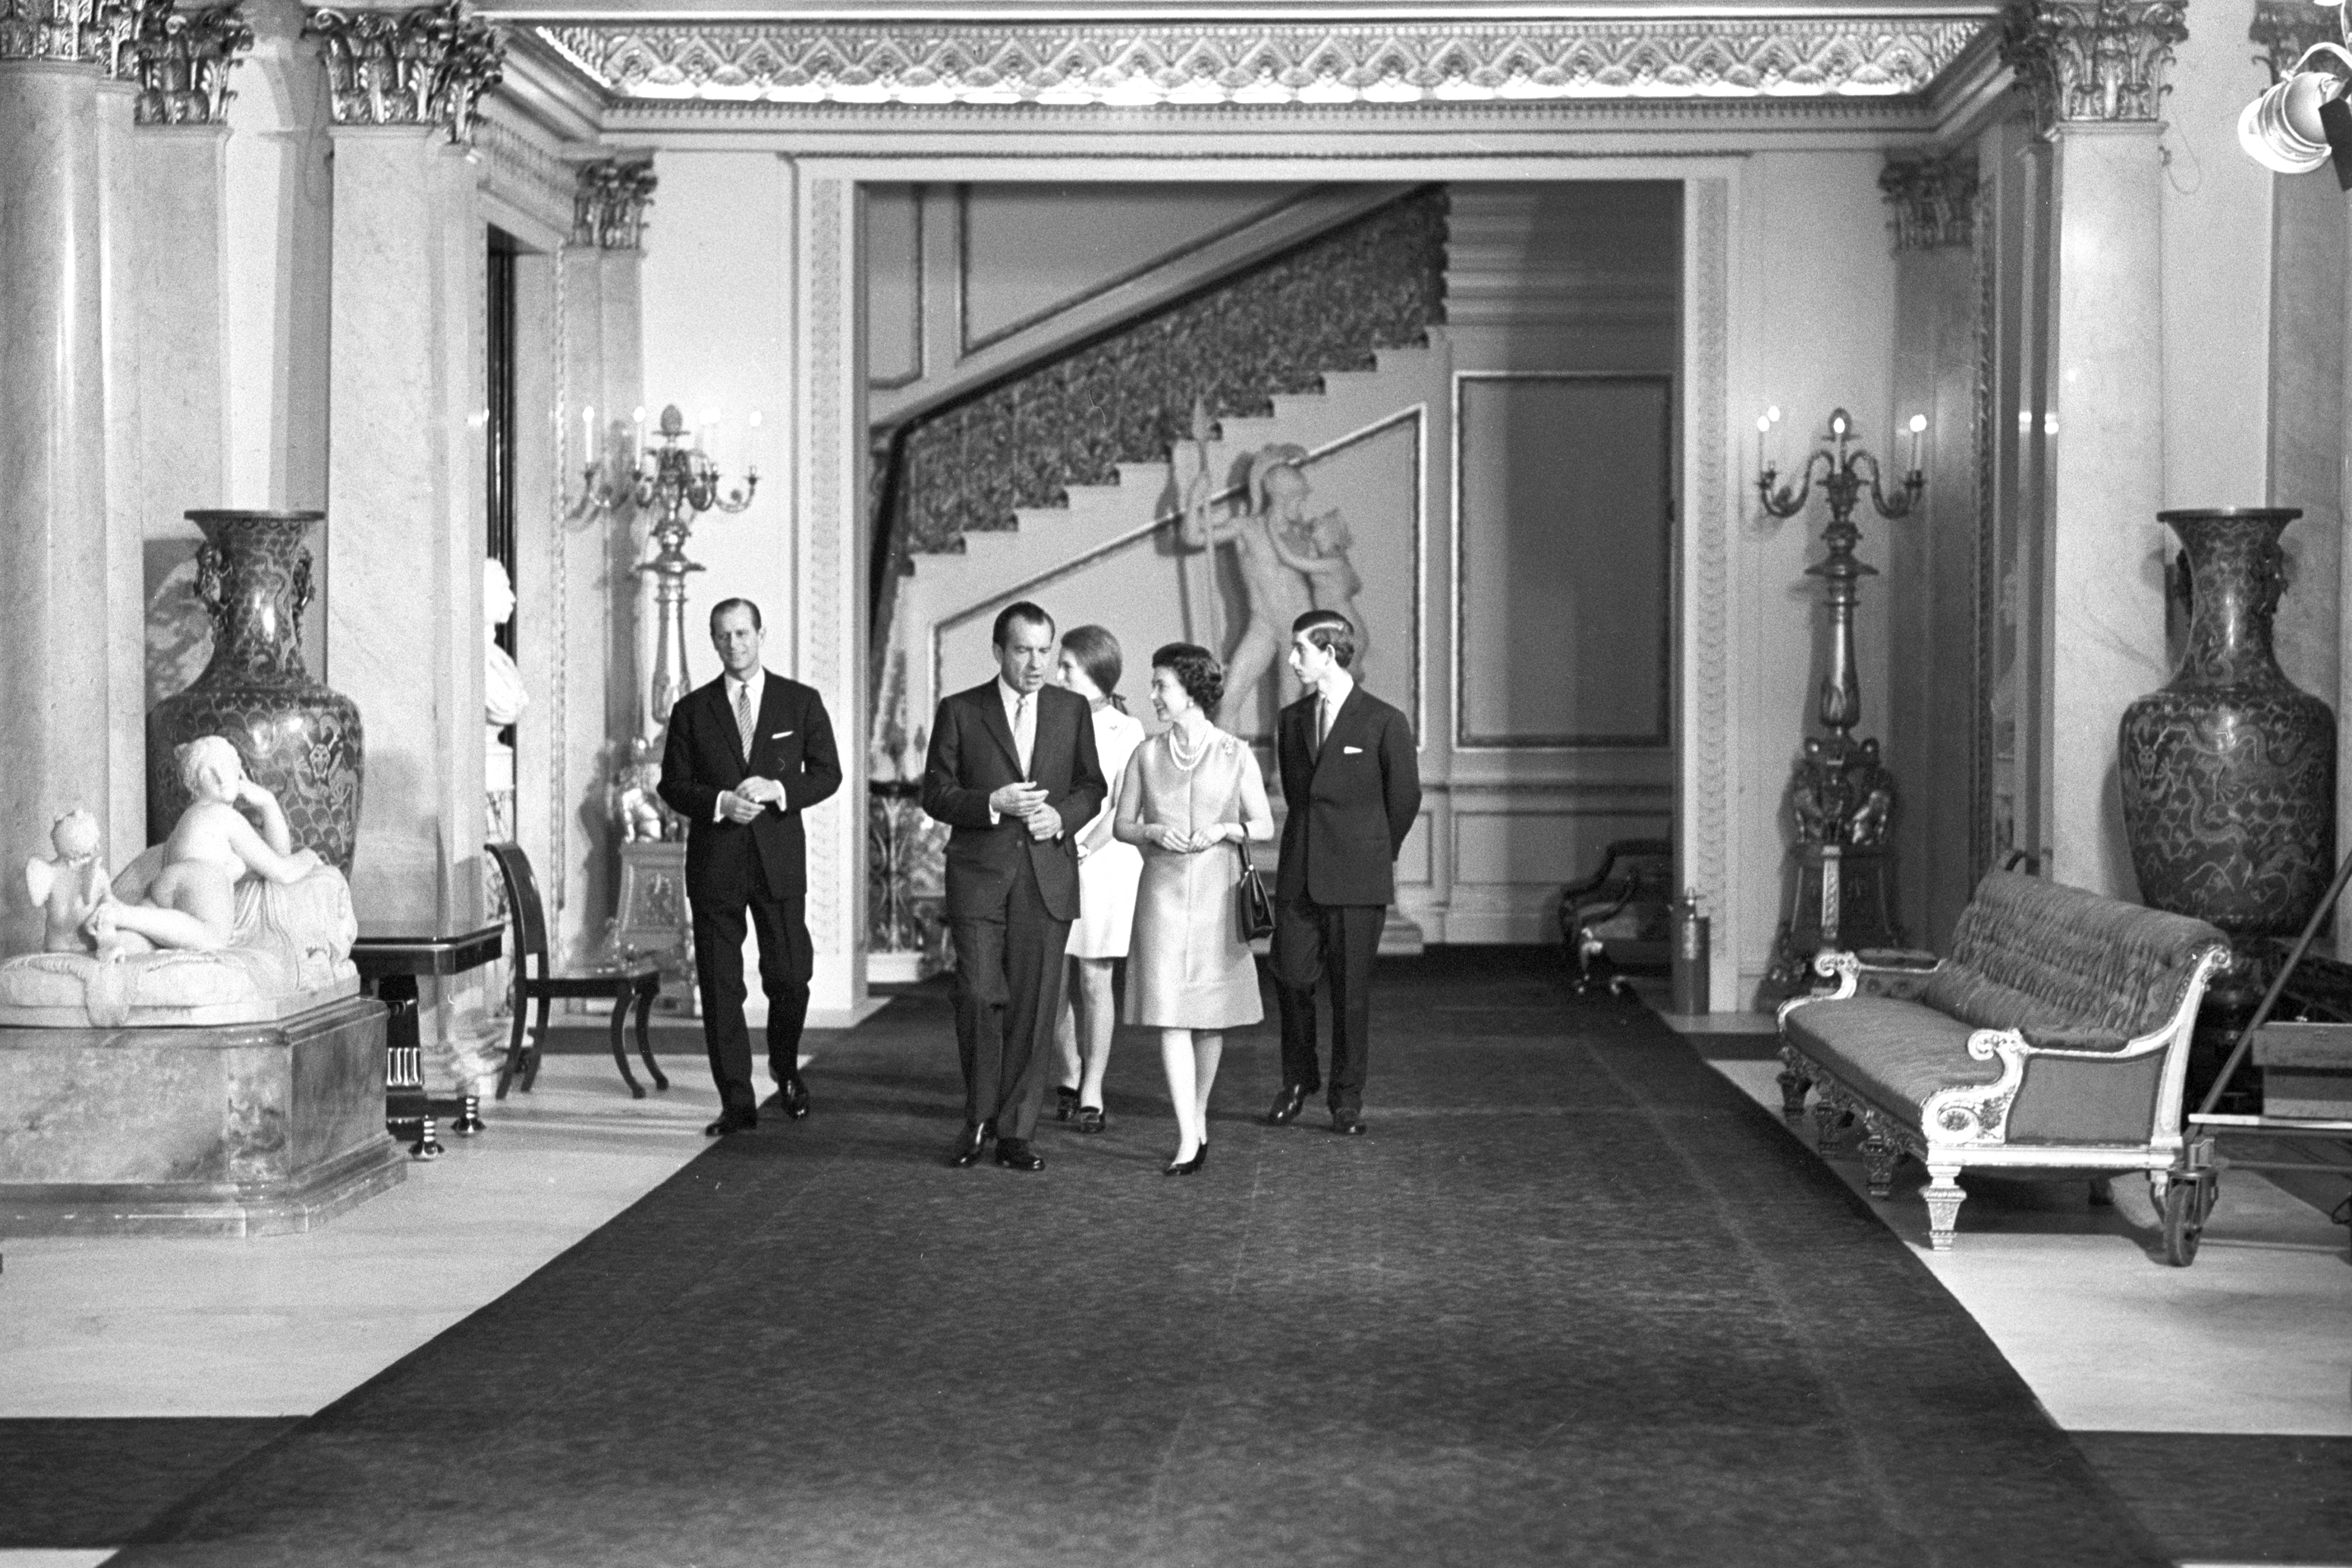 Queen Elizabeth II with American President Richard Nixon, as they walk through the corridors of Buckingham Palace on February 25, 1969. With them are the Duke of Edinburgh and Prince of Wales. (PA Images via Getty Images)